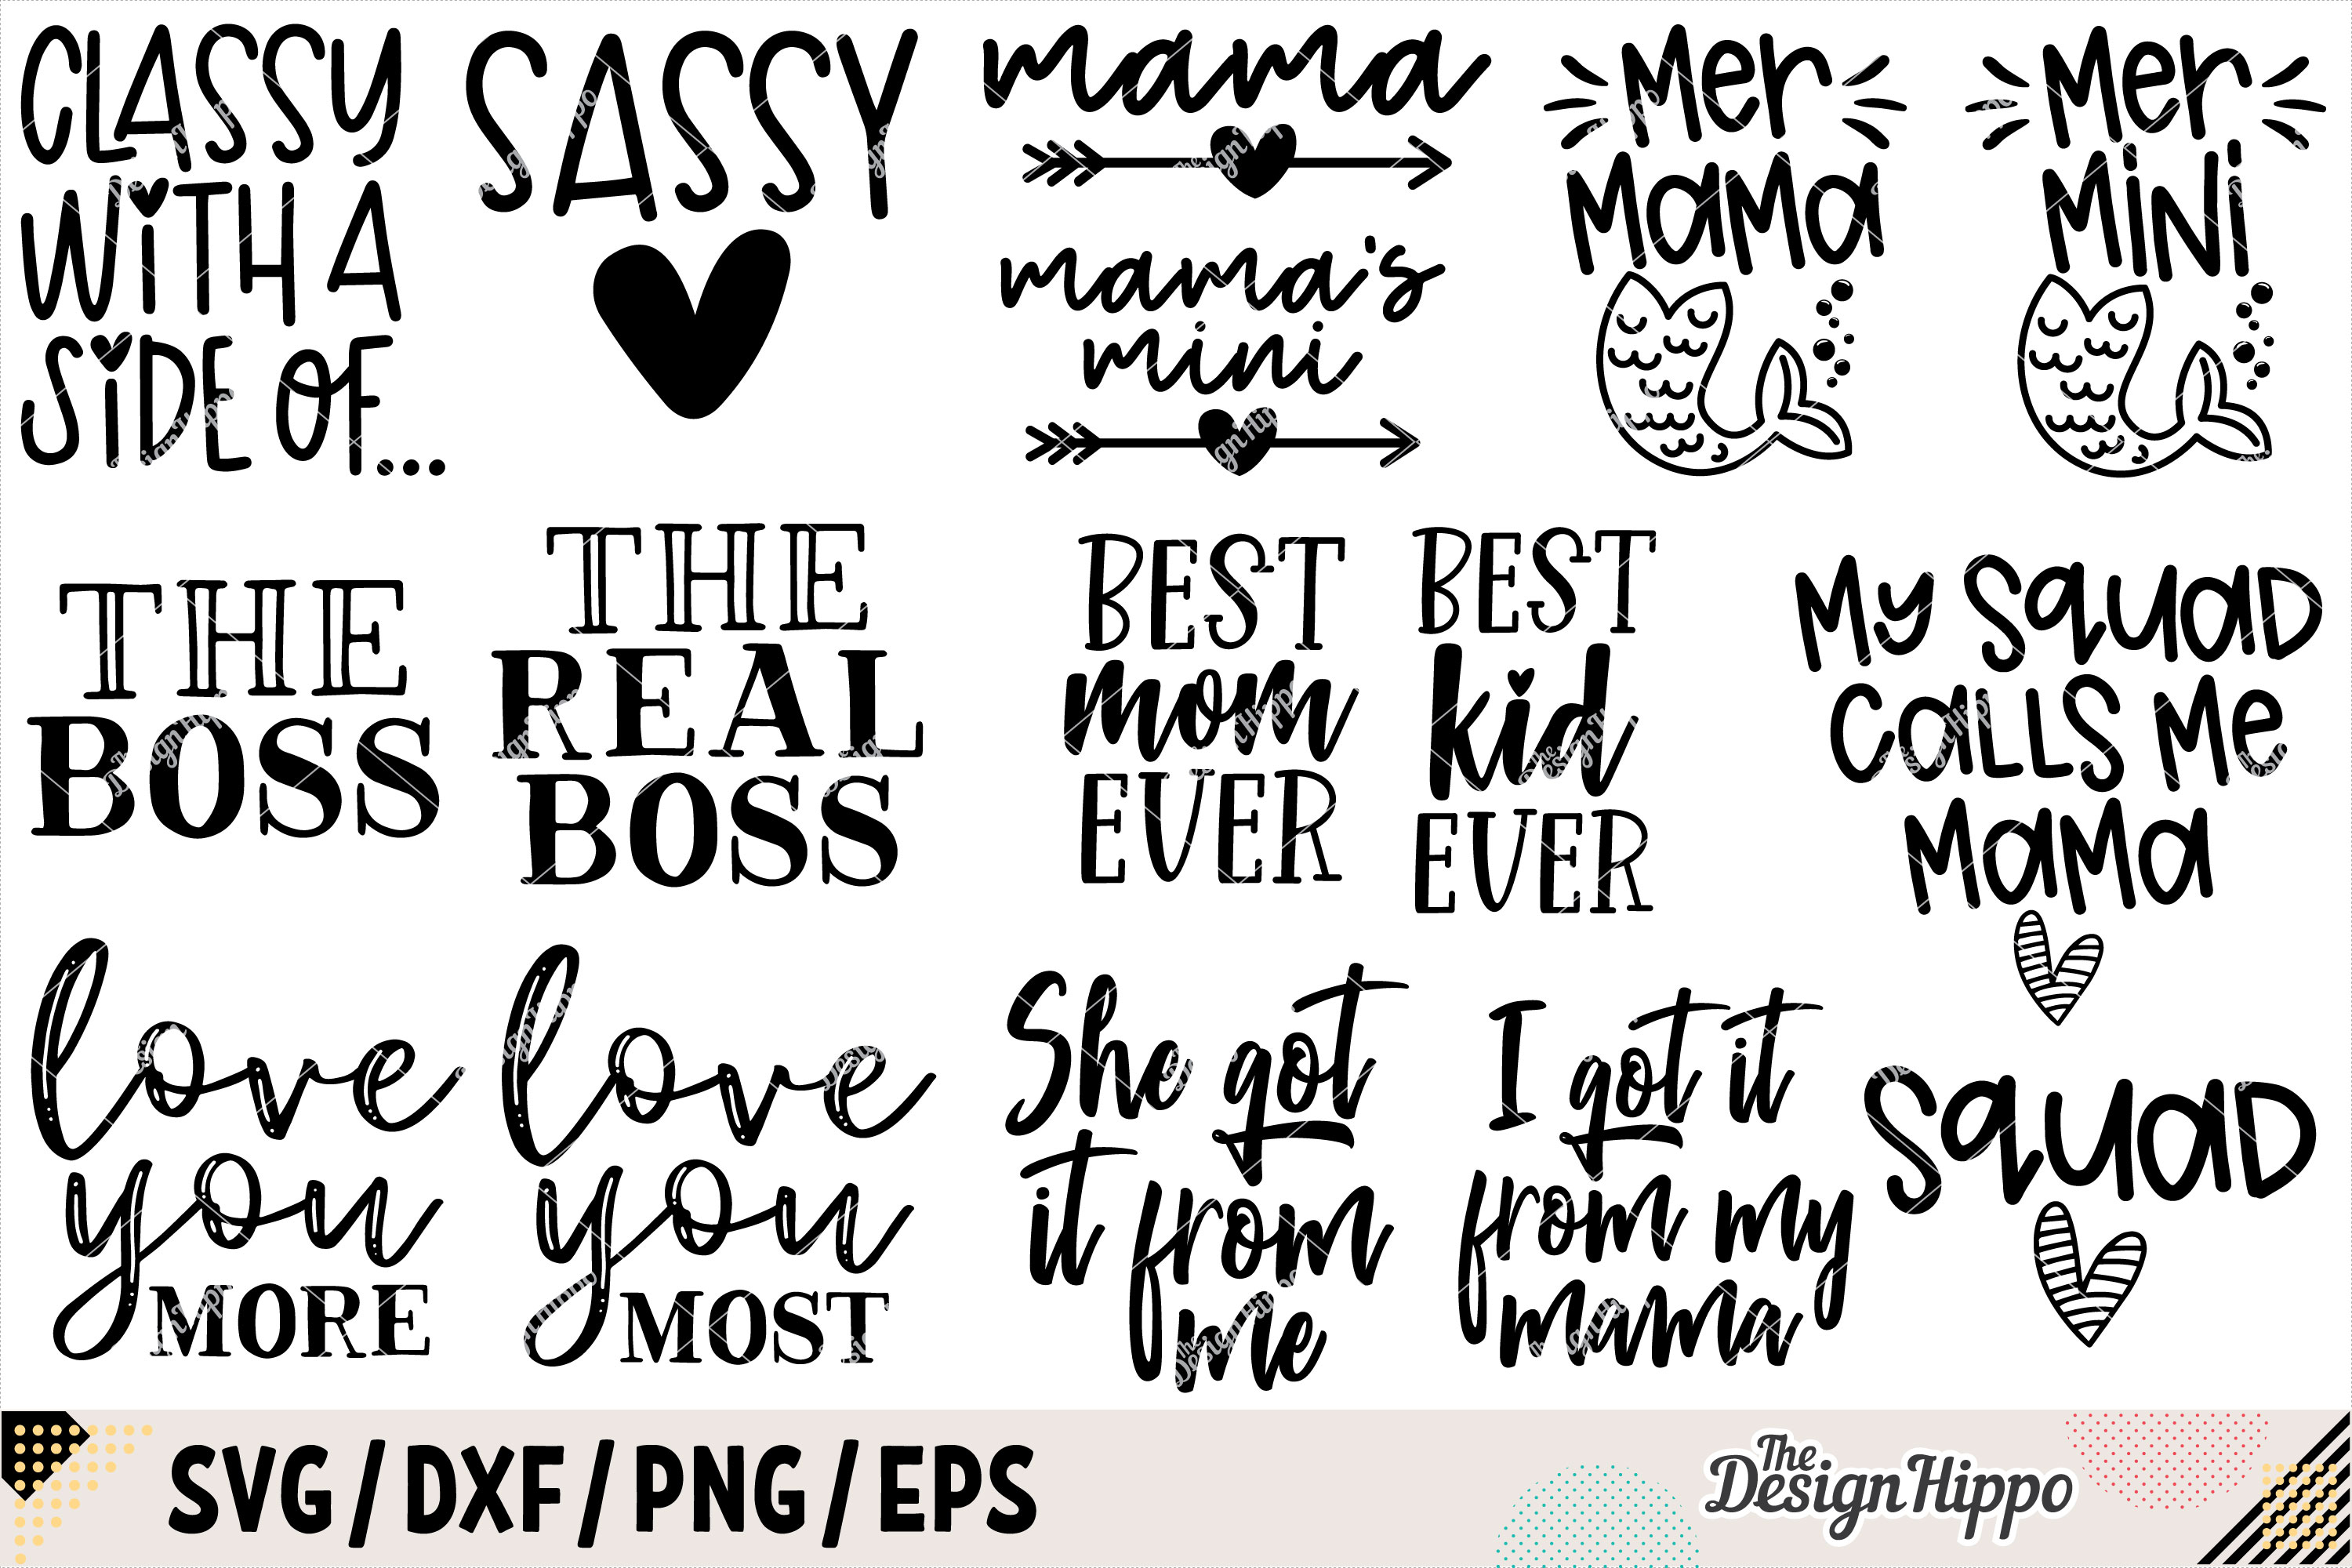 Download Mommy And Me Matching Sets Bundle of 34 Designs SVG DXF PNG